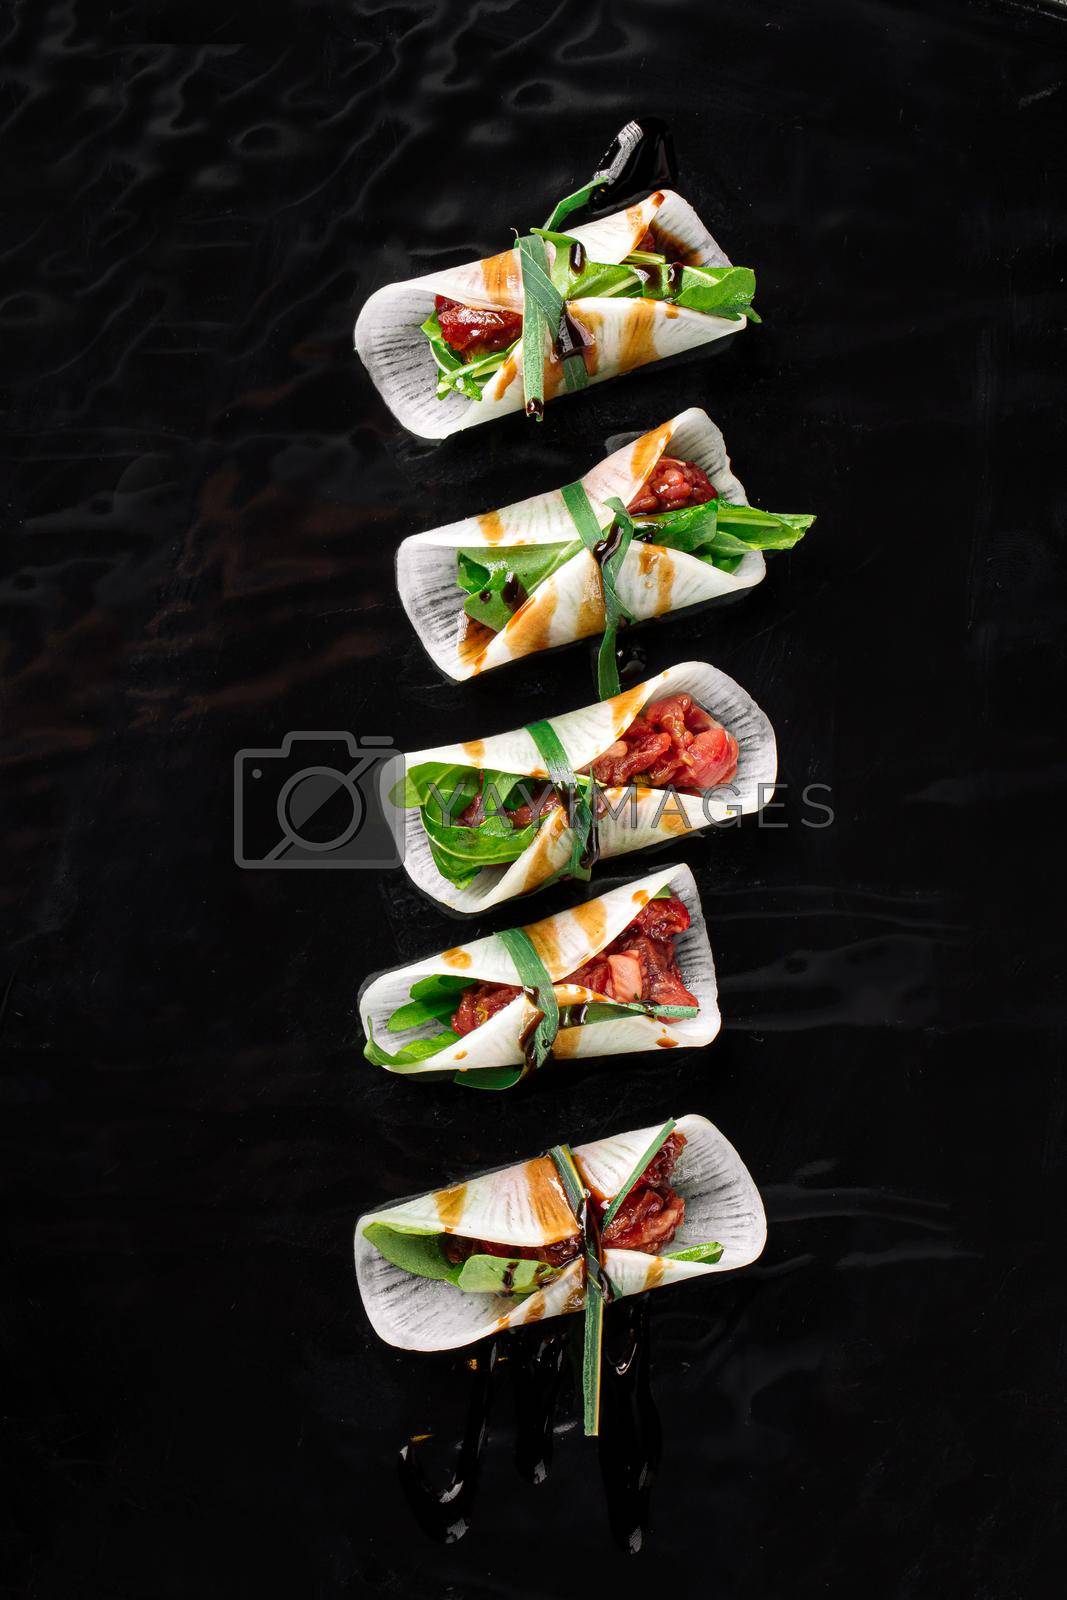 Royalty free image of Veal tartare with daikon appetizer by Hihitetlin